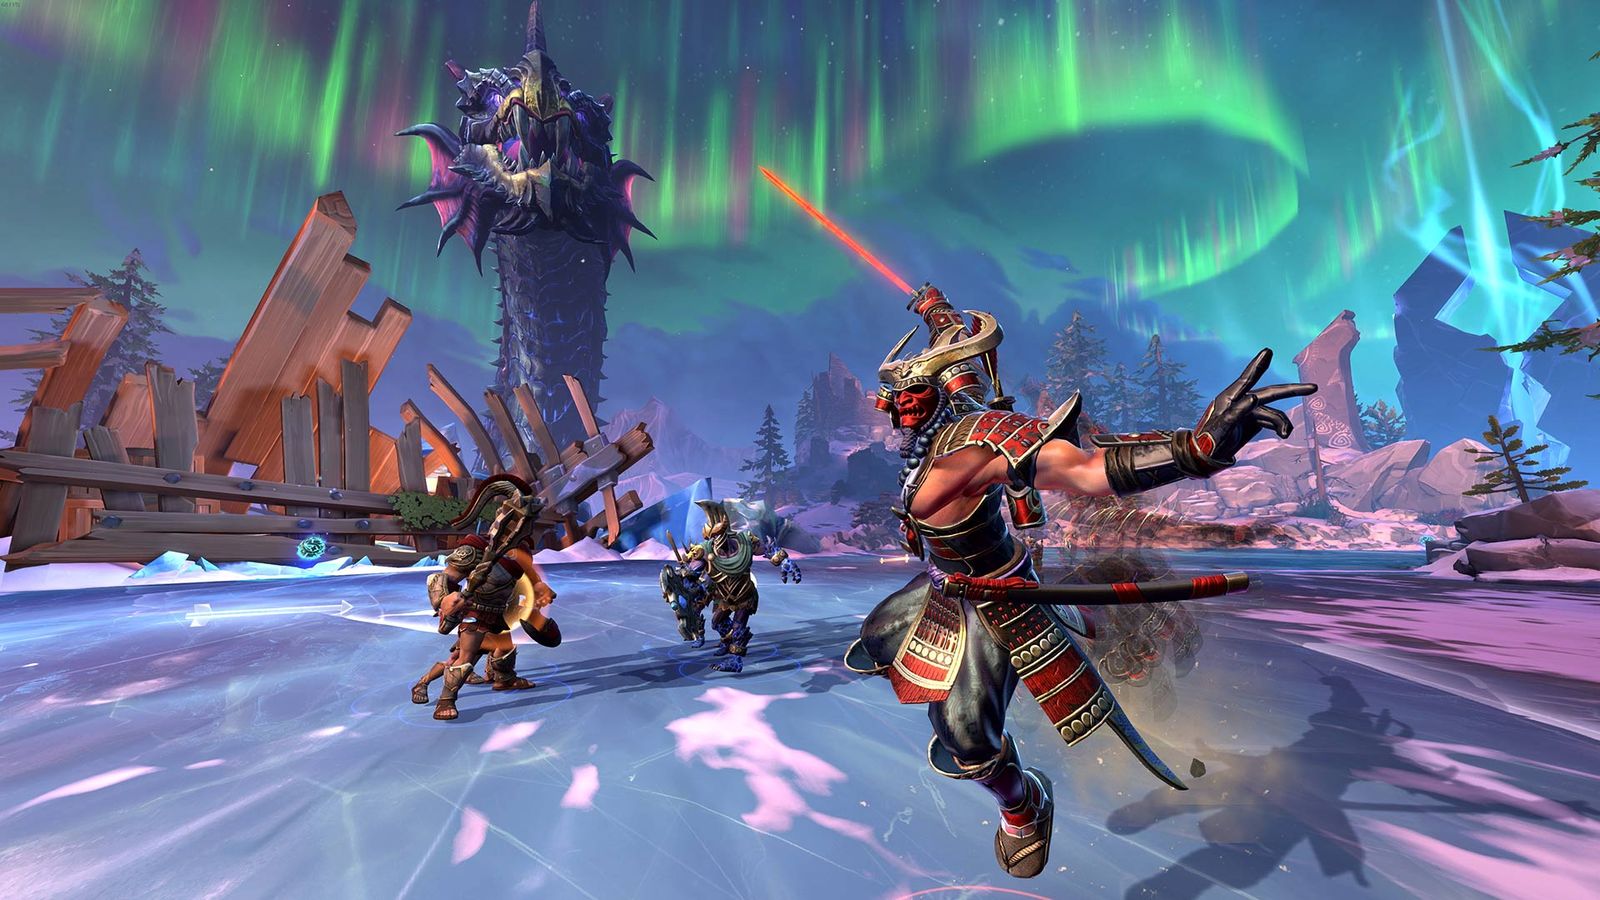 Are Smite servers down - warriors fighting on ice